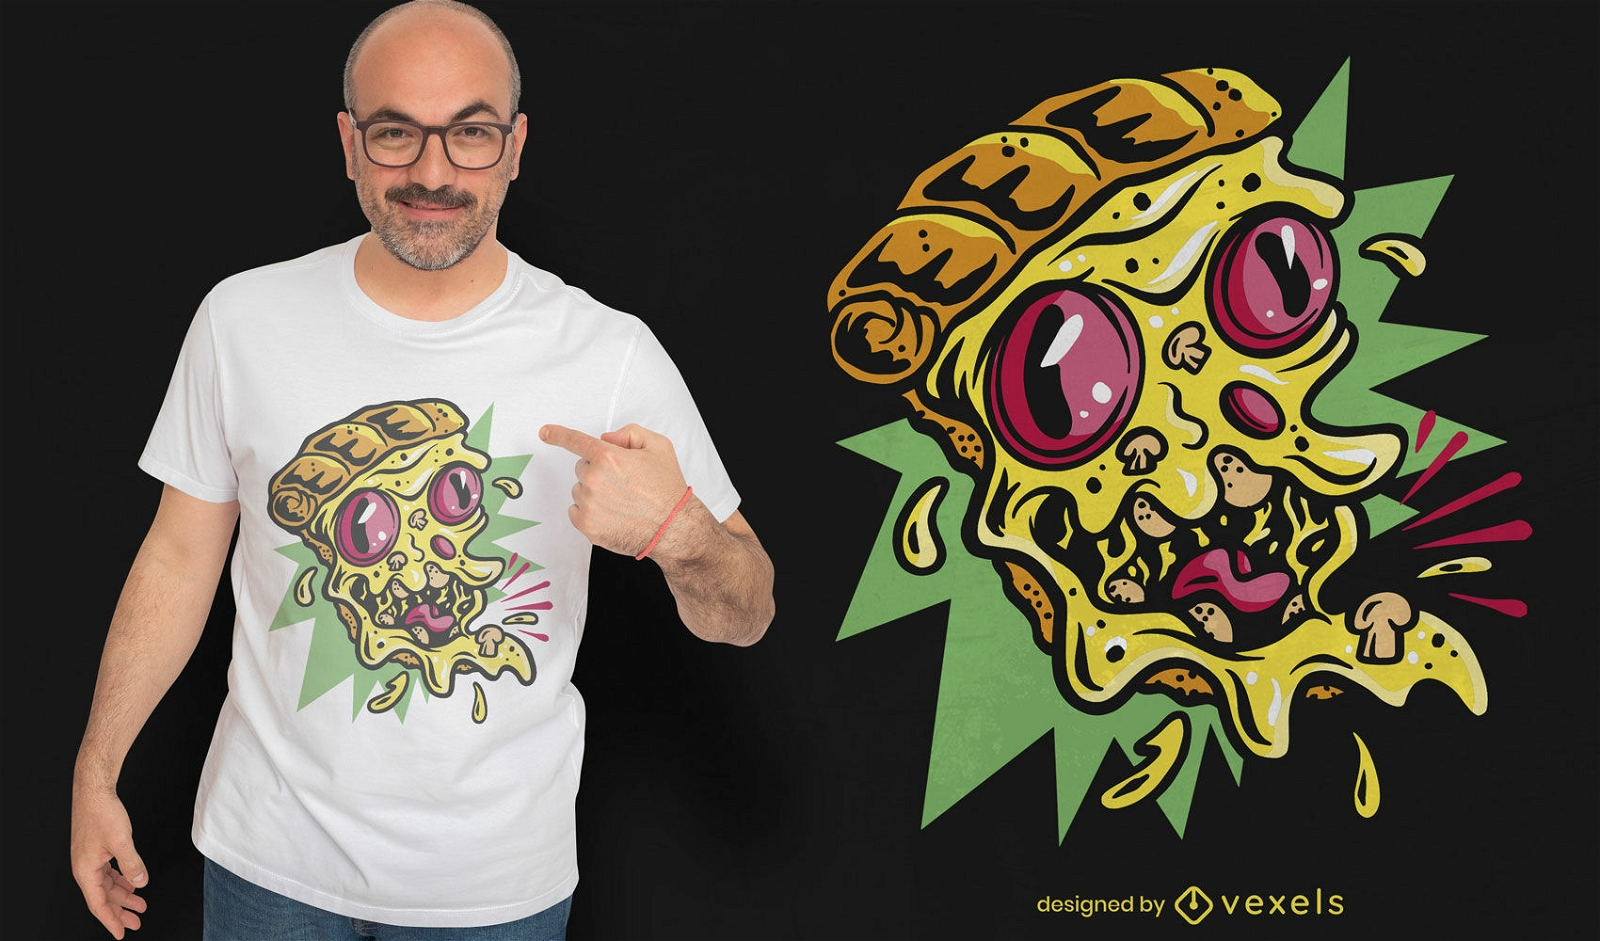 Trippy pizza character t-shirt design